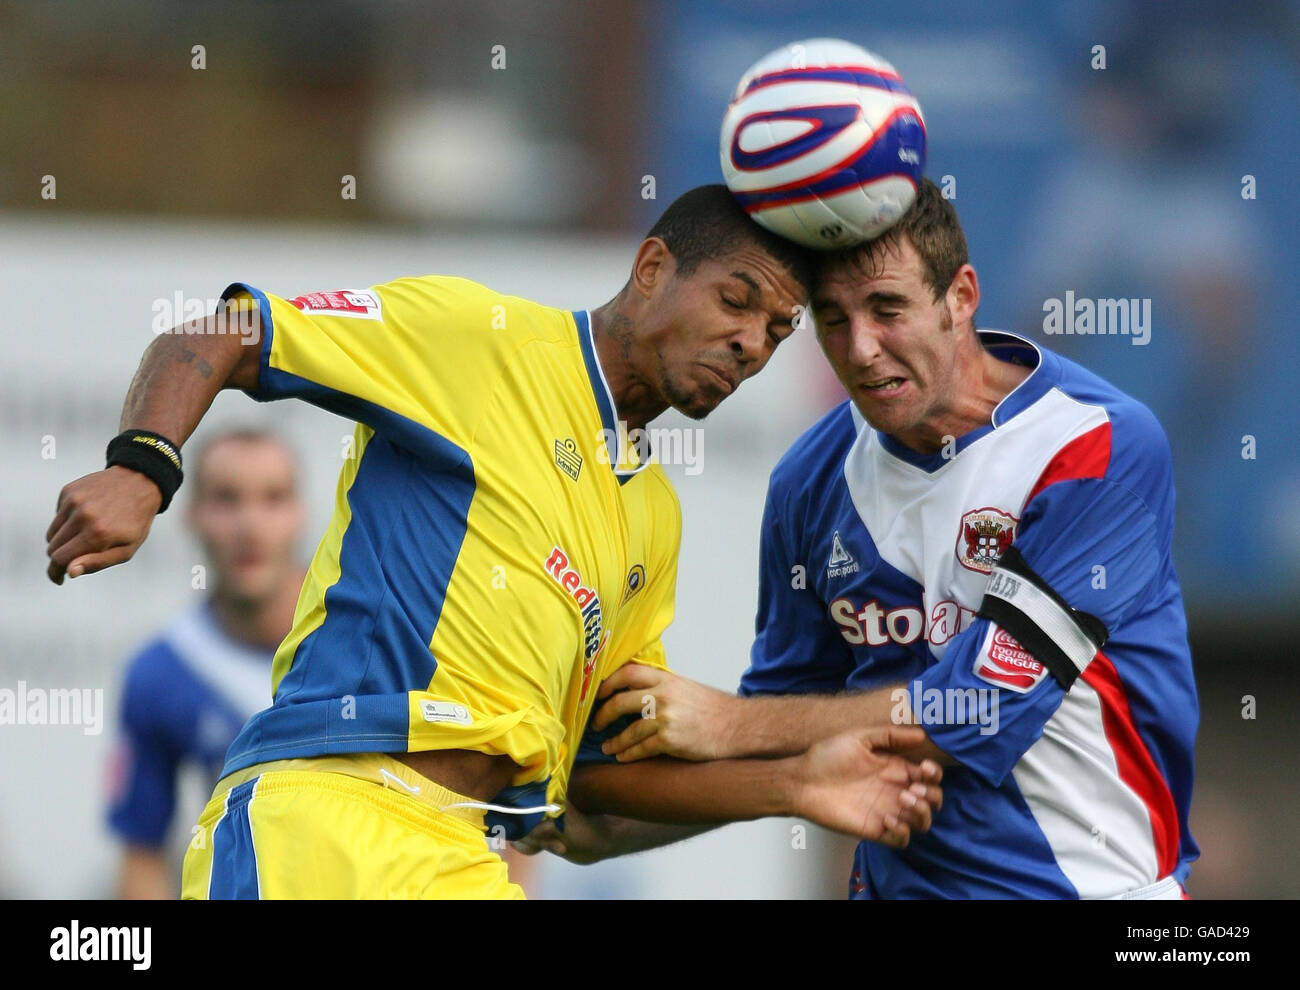 Carlisle United's Danny Livesy and Leed's United's Jermaine Beckford during the Coca-Cola Football League One match at Brunton Park, Carlisle. Stock Photo